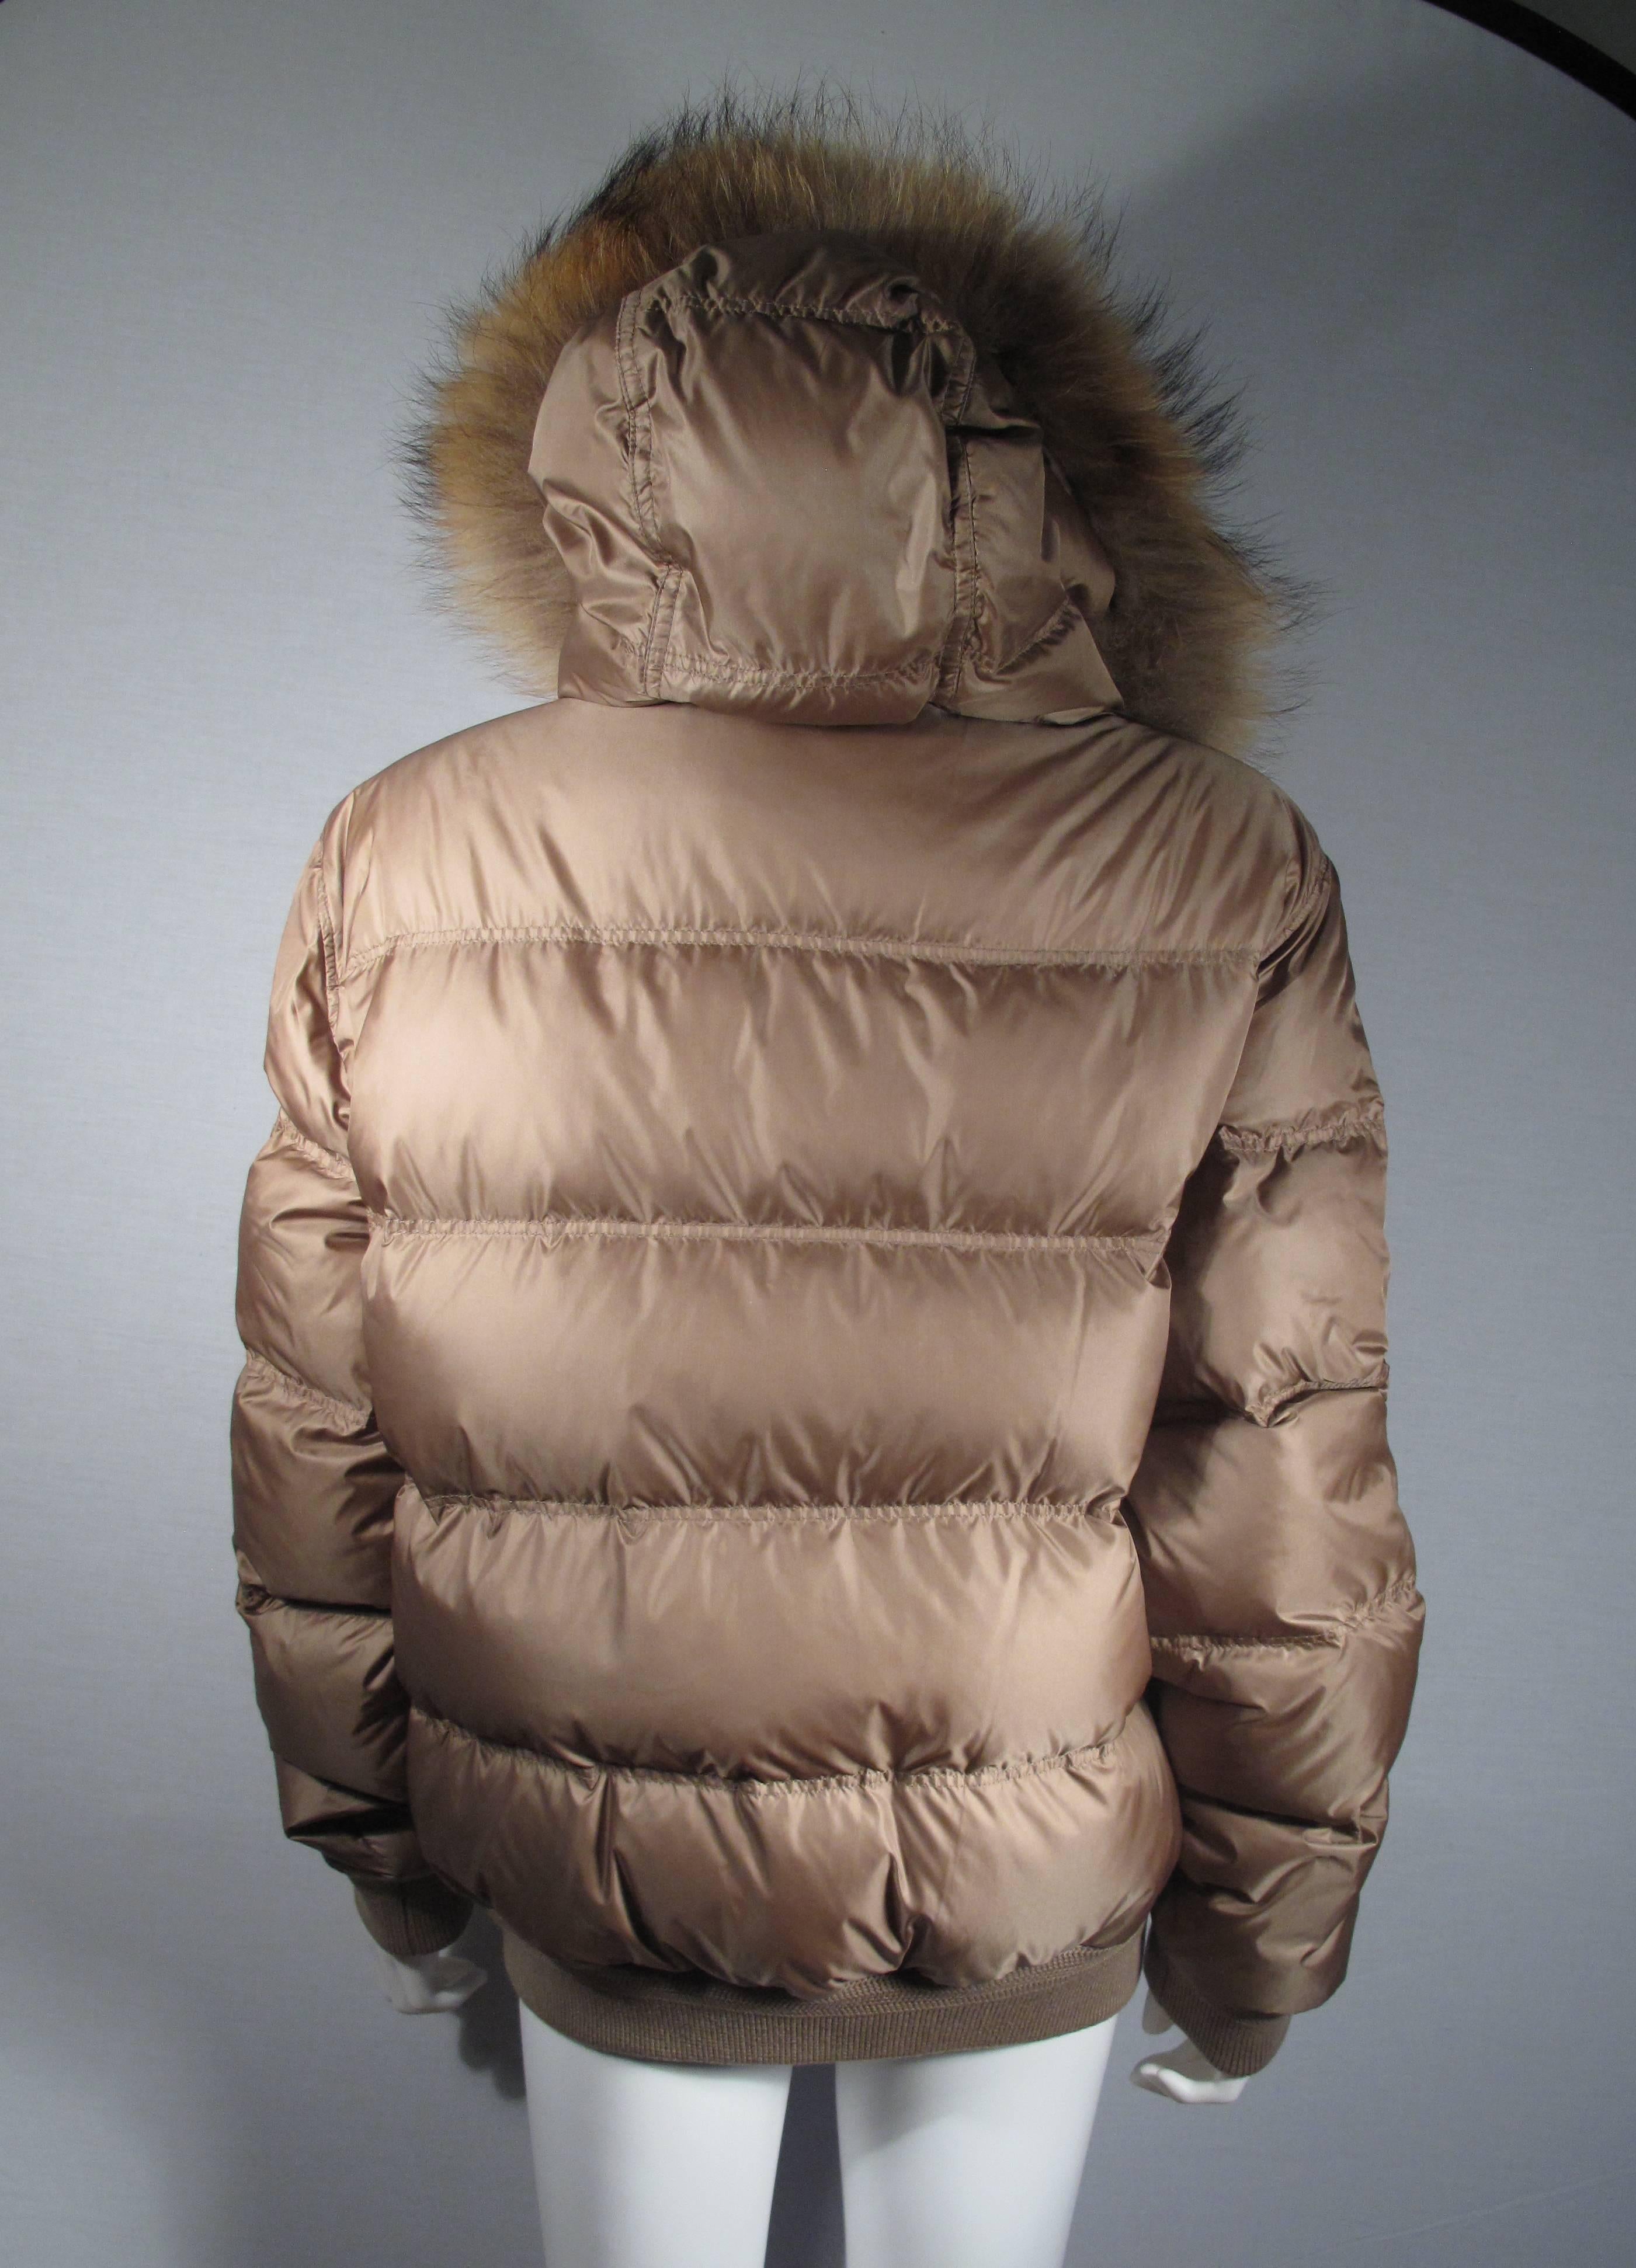 Burberry Brit - Down & Fur Hooded Jacket

Size: Medium (Womens)

Color:  Tan

Material: 

Jacket: 100% Nylon

Lining: 100% Nylon

Filling: 100% Duck Down

------------------------------------------------------------

Details:

-